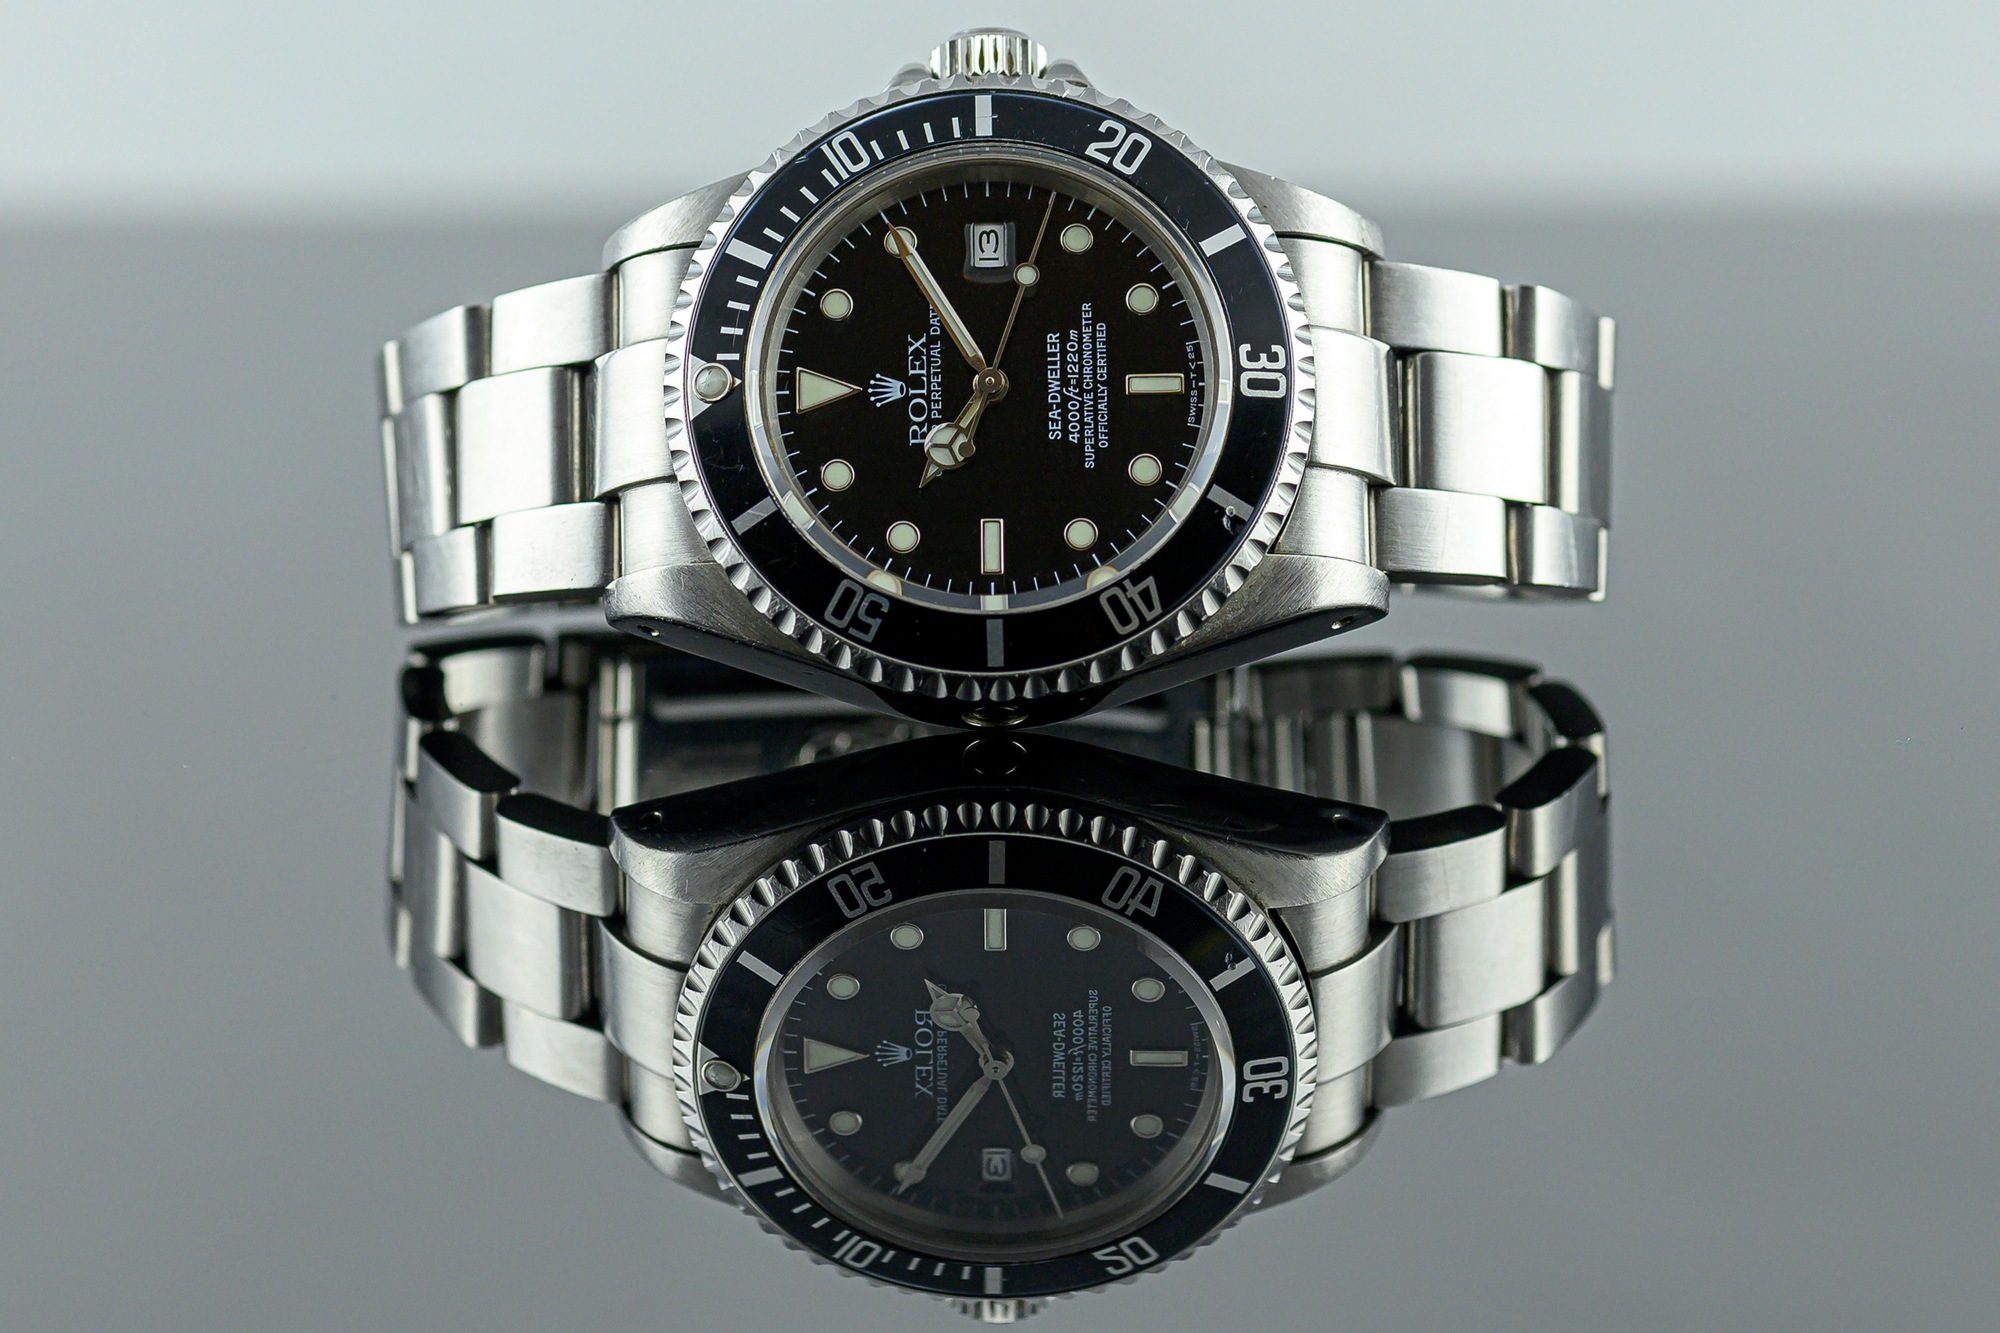 Wrist Game or Crying Shame: A Used Rolex Submariner Hulk 116610LV